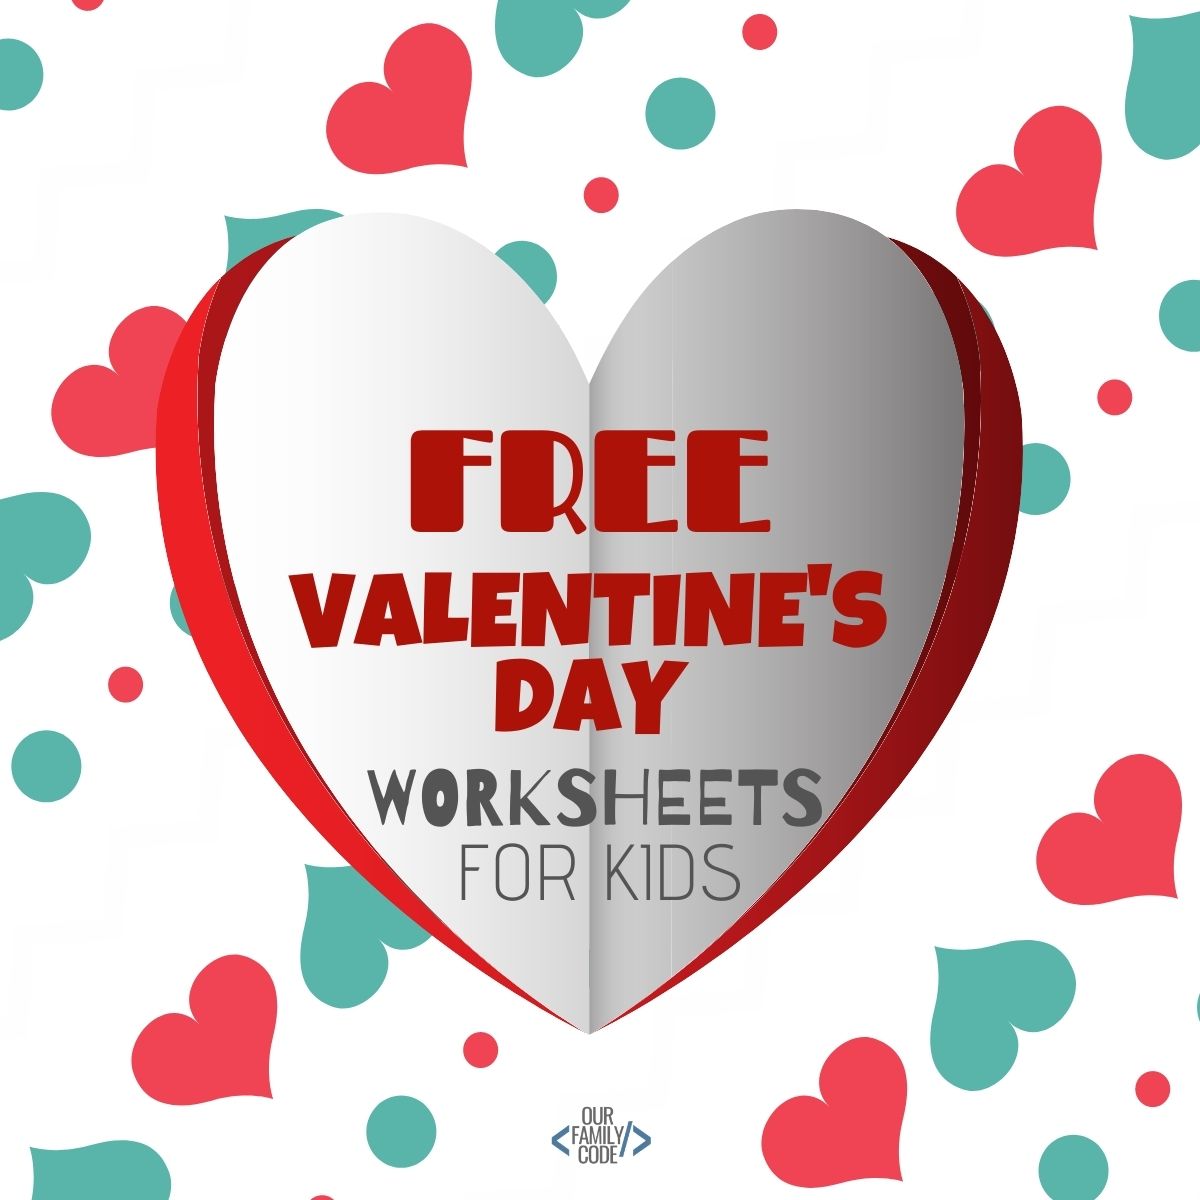 FI Free Valentines Day Worksheets for Kids You’ll love these hands-on science STEAM activities!